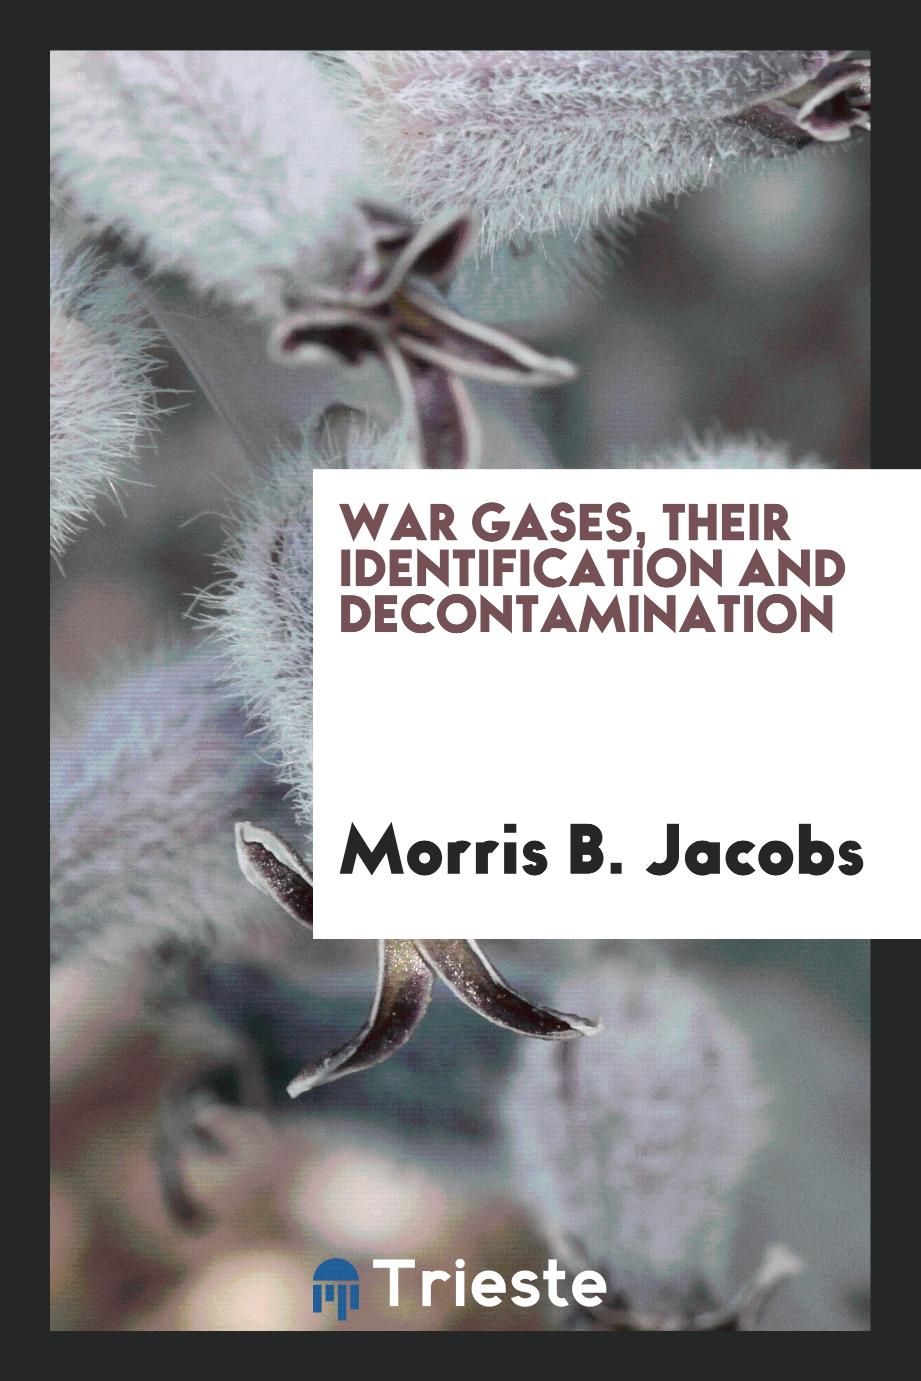 War gases, their identification and decontamination